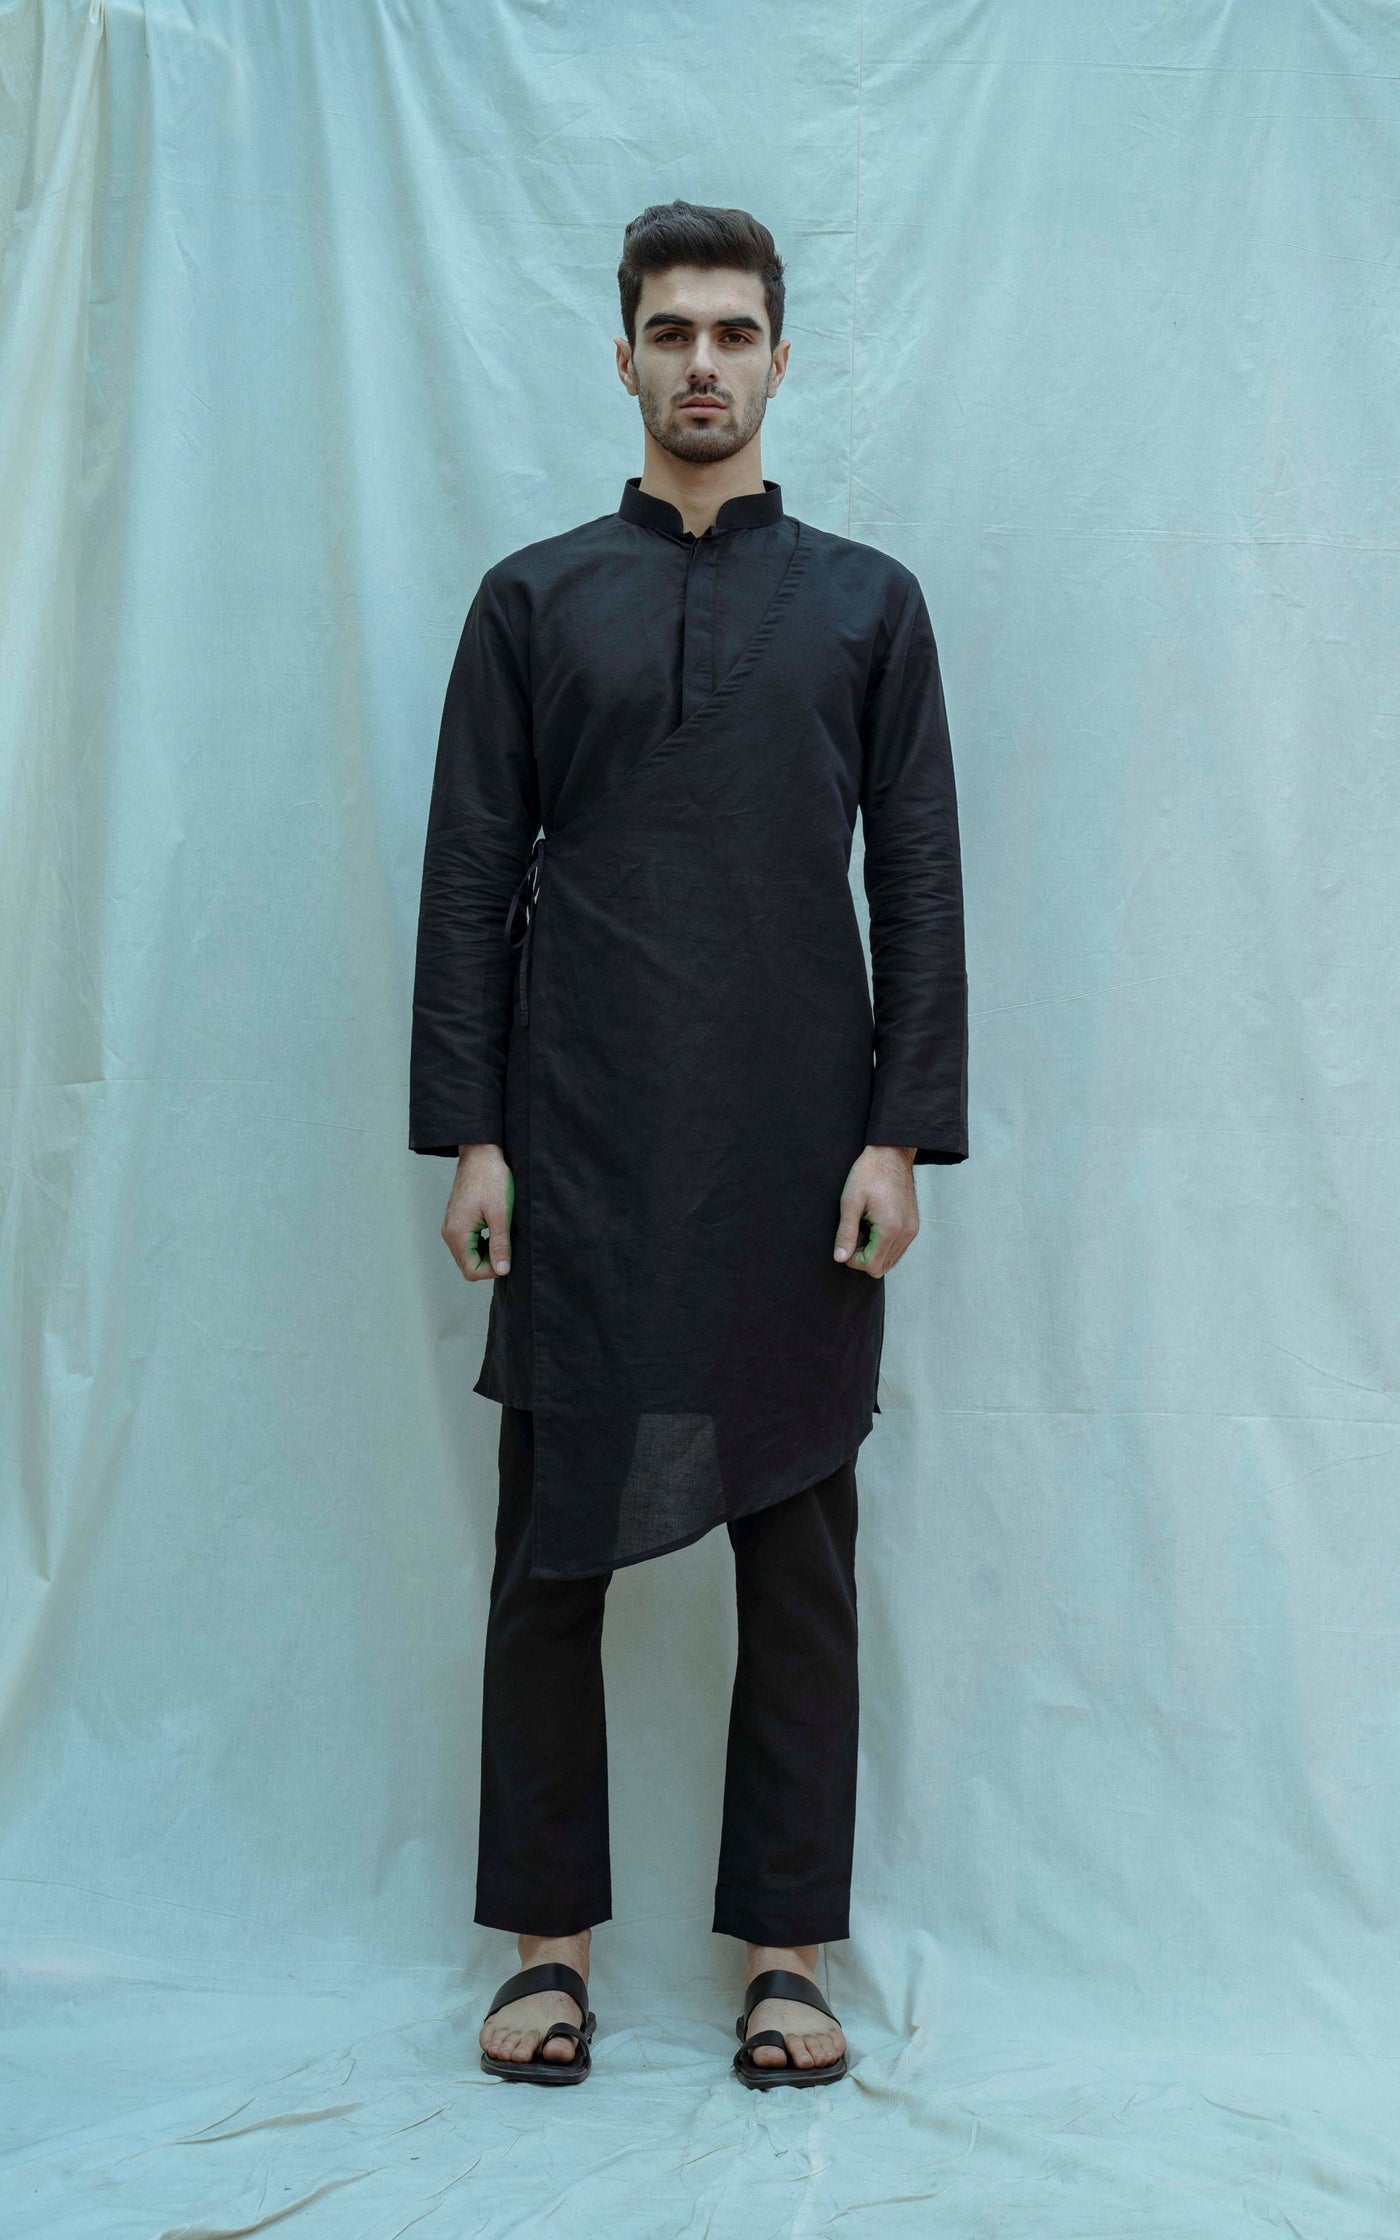 Soft Black Kurta Set Indian Clothing in Denver, CO, Aurora, CO, Boulder, CO, Fort Collins, CO, Colorado Springs, CO, Parker, CO, Highlands Ranch, CO, Cherry Creek, CO, Centennial, CO, and Longmont, CO. NATIONWIDE SHIPPING USA- India Fashion X